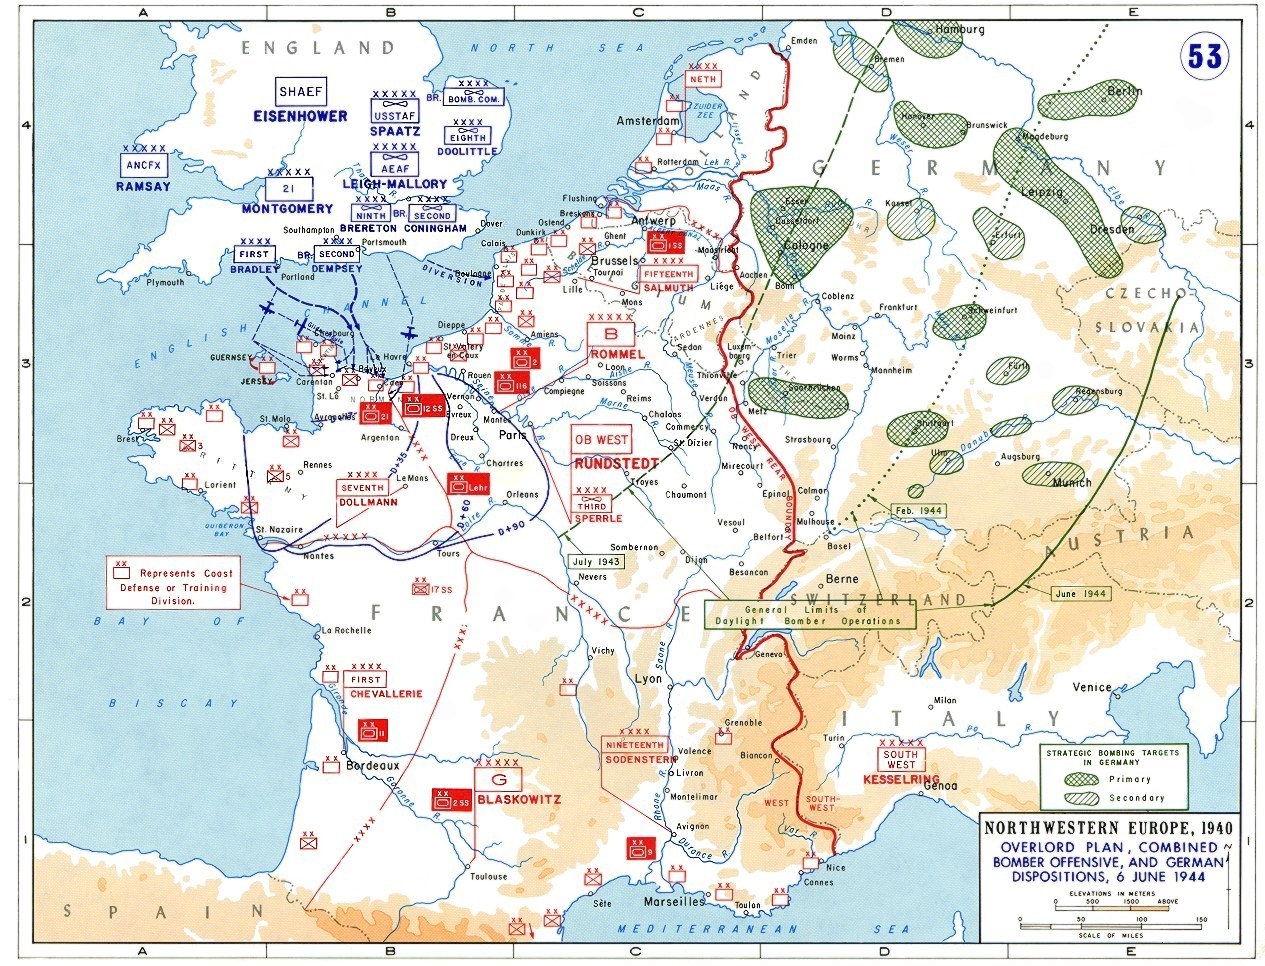 Planning for Operation Overlord: German dispositions on June 6, 1944 ...